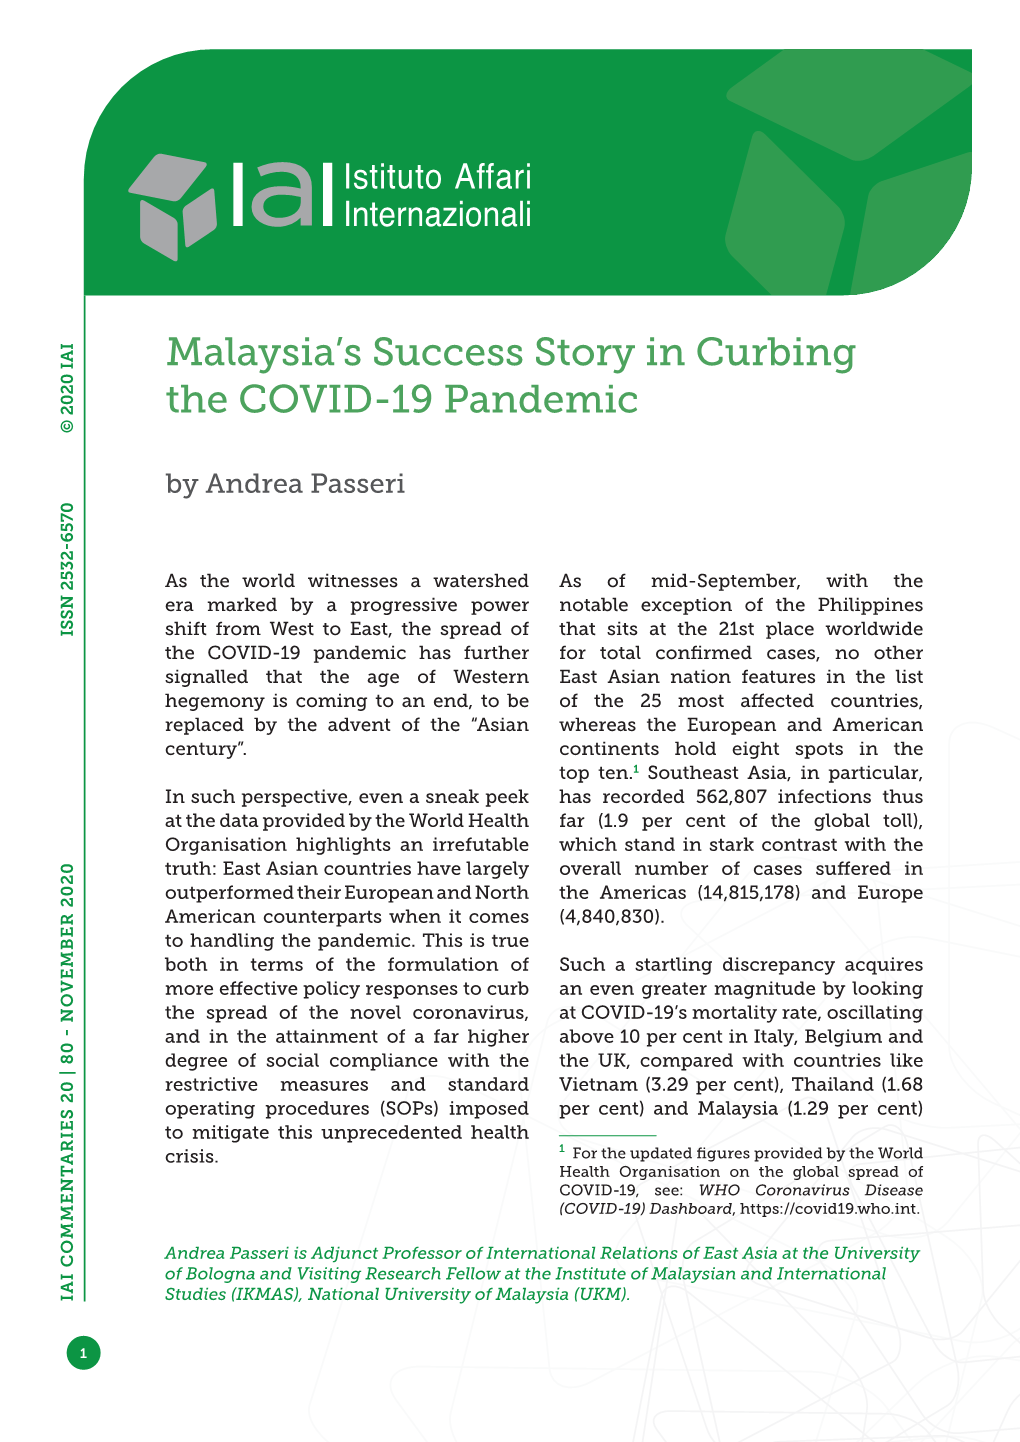 Malaysia's Success Story in Curbing the COVID-19 Pandemic